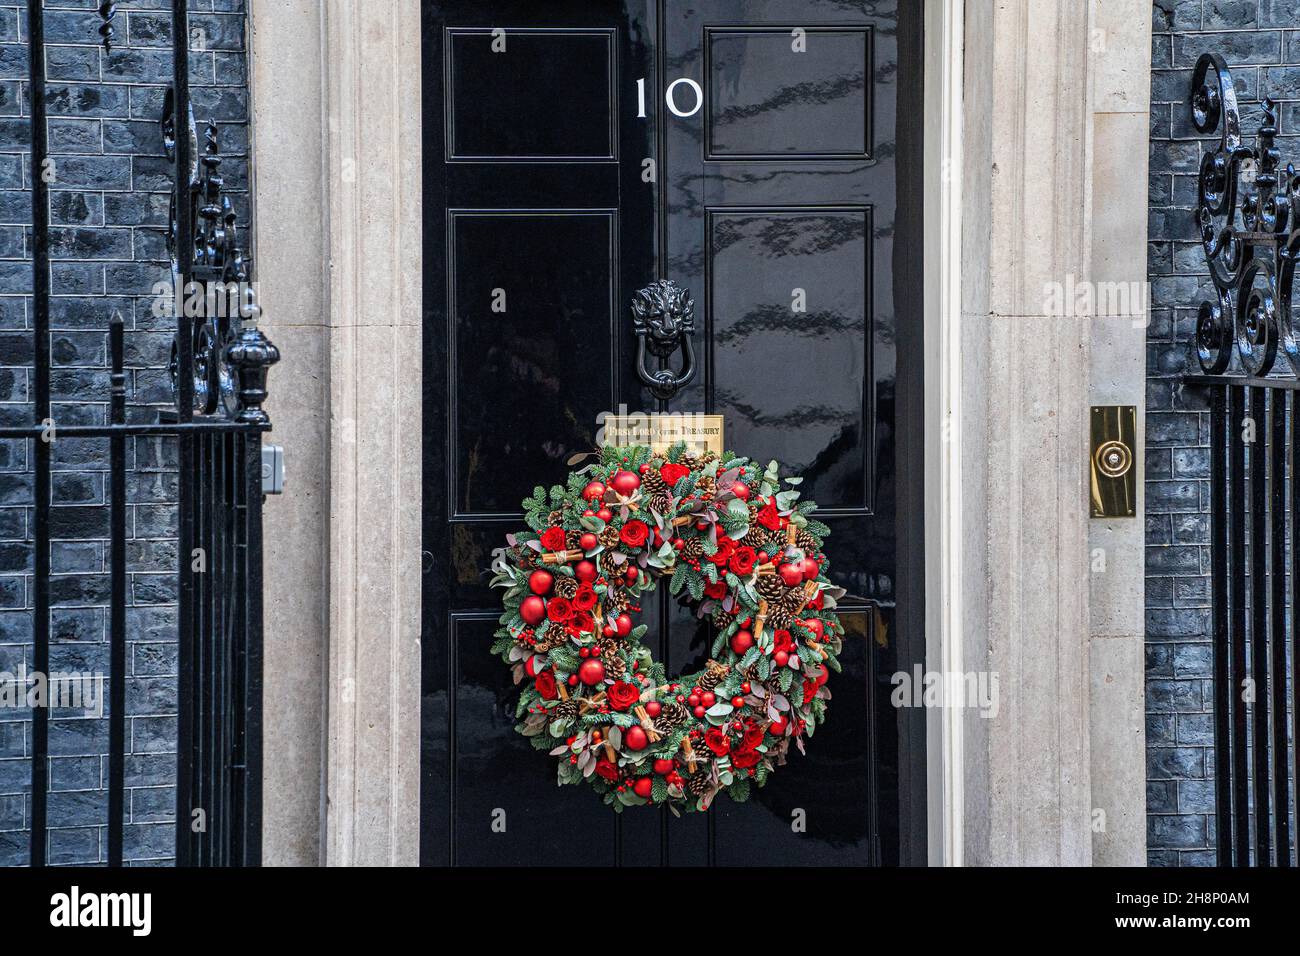 LONDON,UK. 1 December 2021.  A Christmas wreath is place on the door to 10 Downing Street Credit: amer ghazzal/Alamy Live News Stock Photo